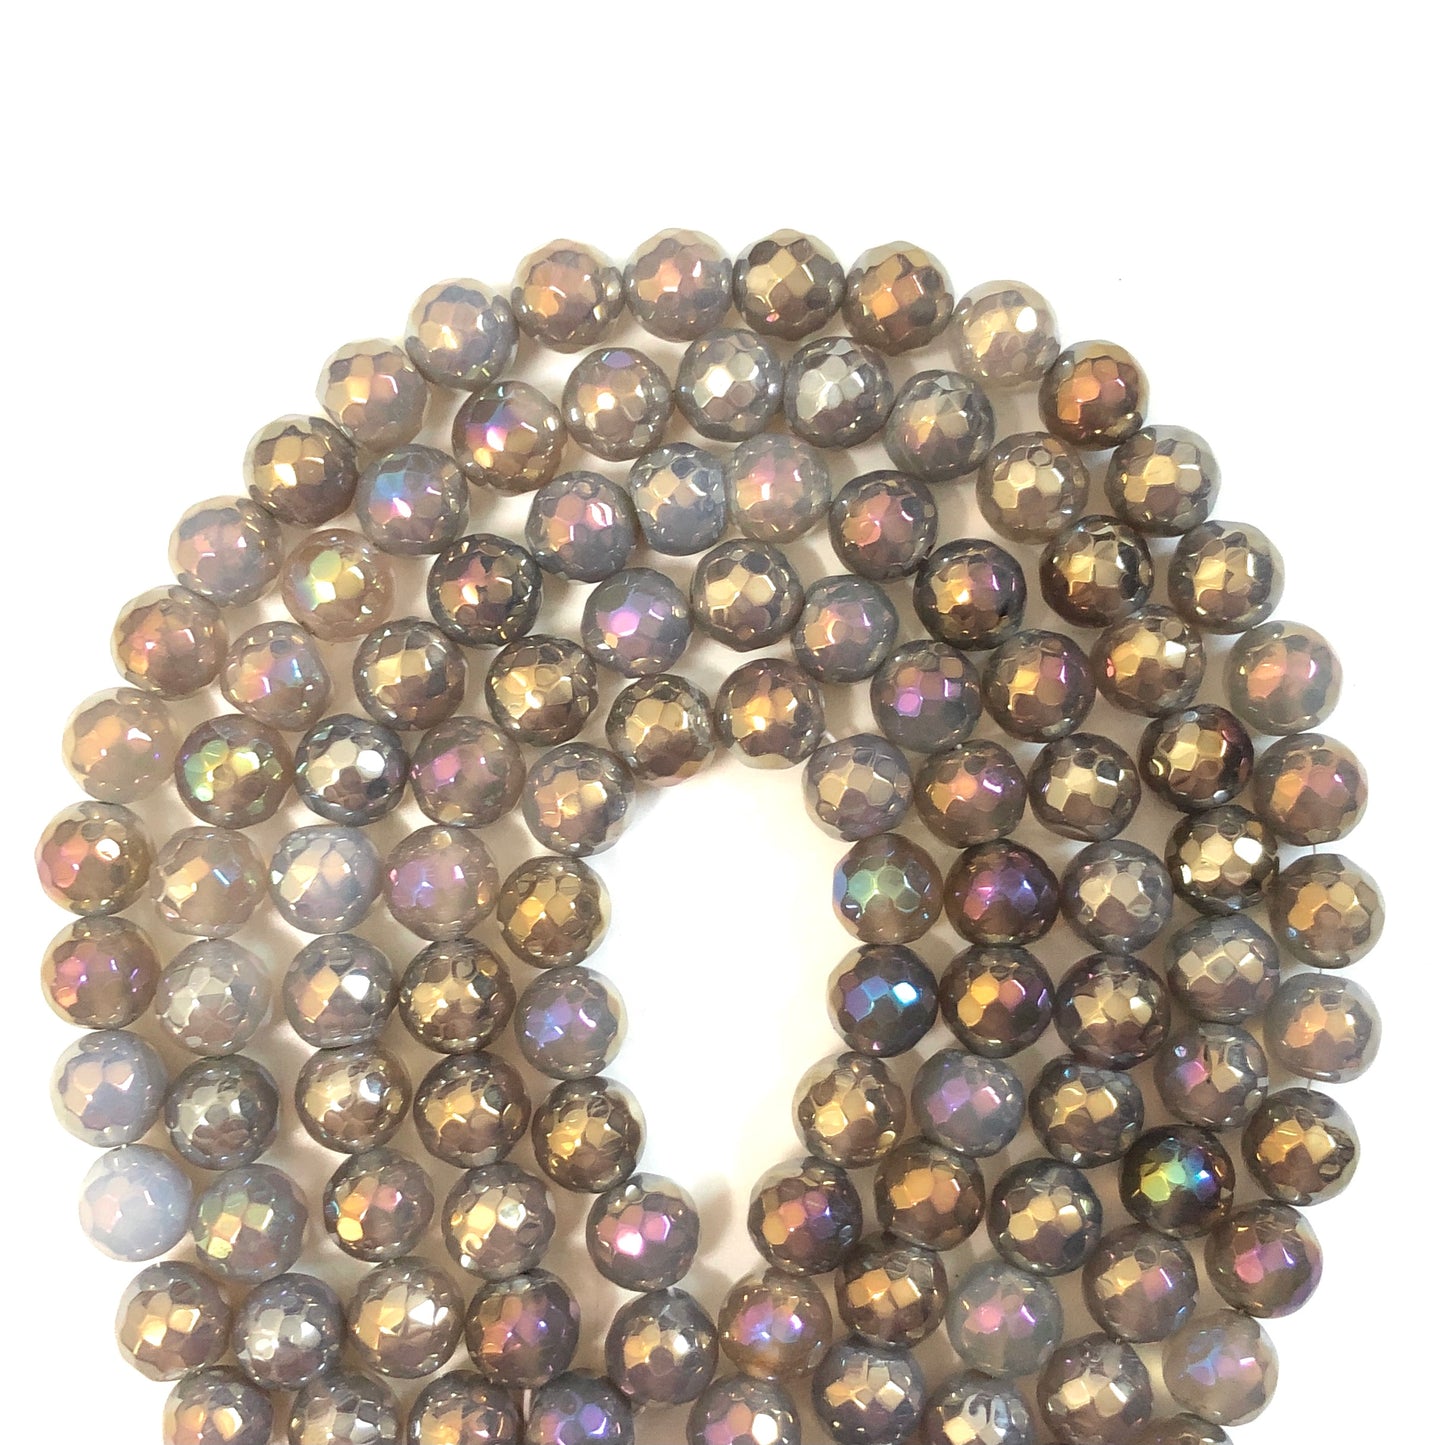 2 Strands/lot 10mm, 12mm Electroplated AB Gray Faceted Agate Stone Beads Electroplated Beads 12mm Stone Beads Electroplated Faceted Agate Beads New Beads Arrivals Charms Beads Beyond